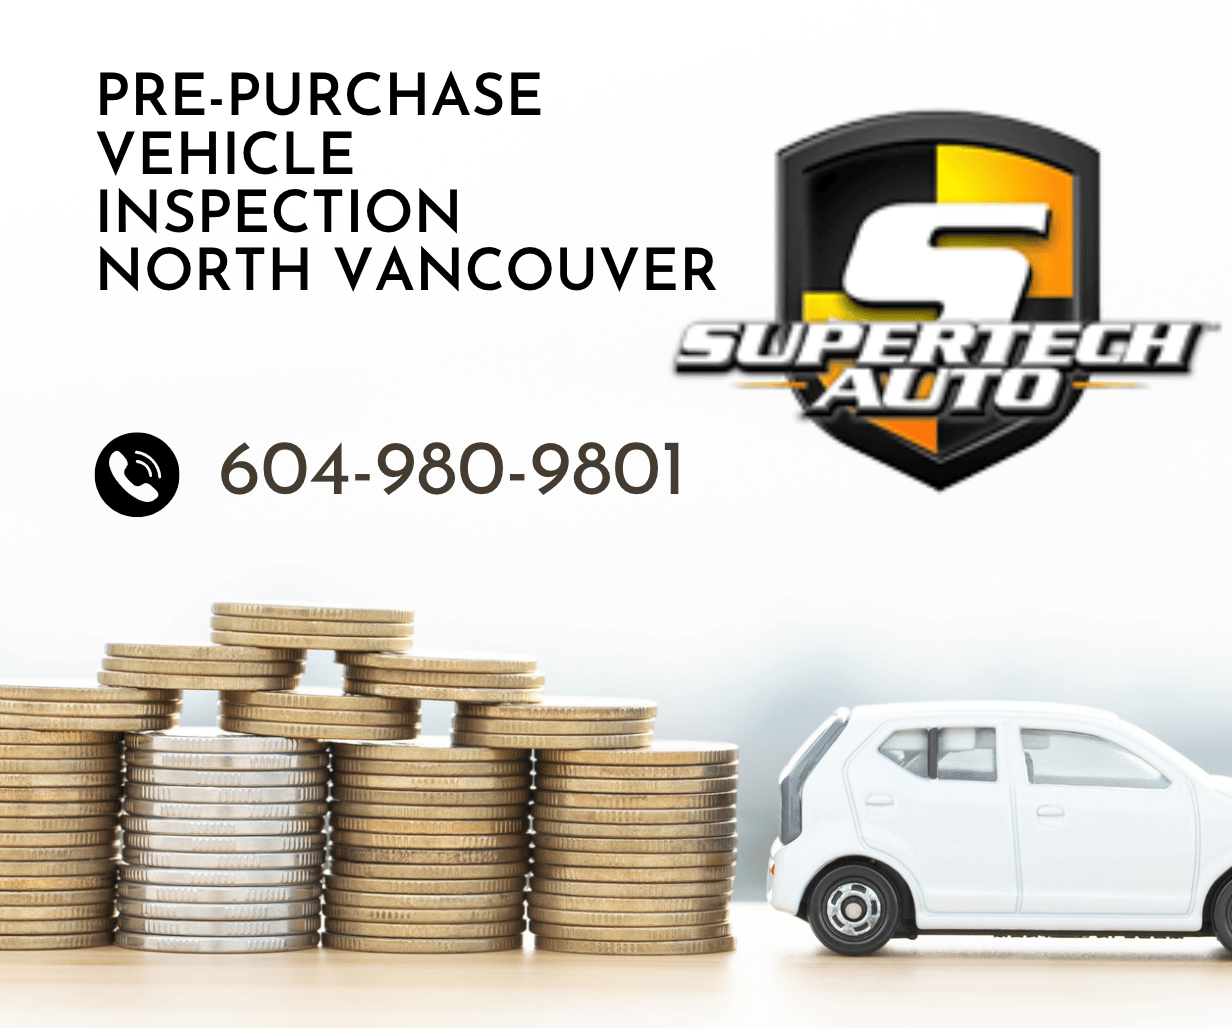 Seeking a Pre-Purchase Vehicle Inspection in North Vancouver? SuperTech Can Help!